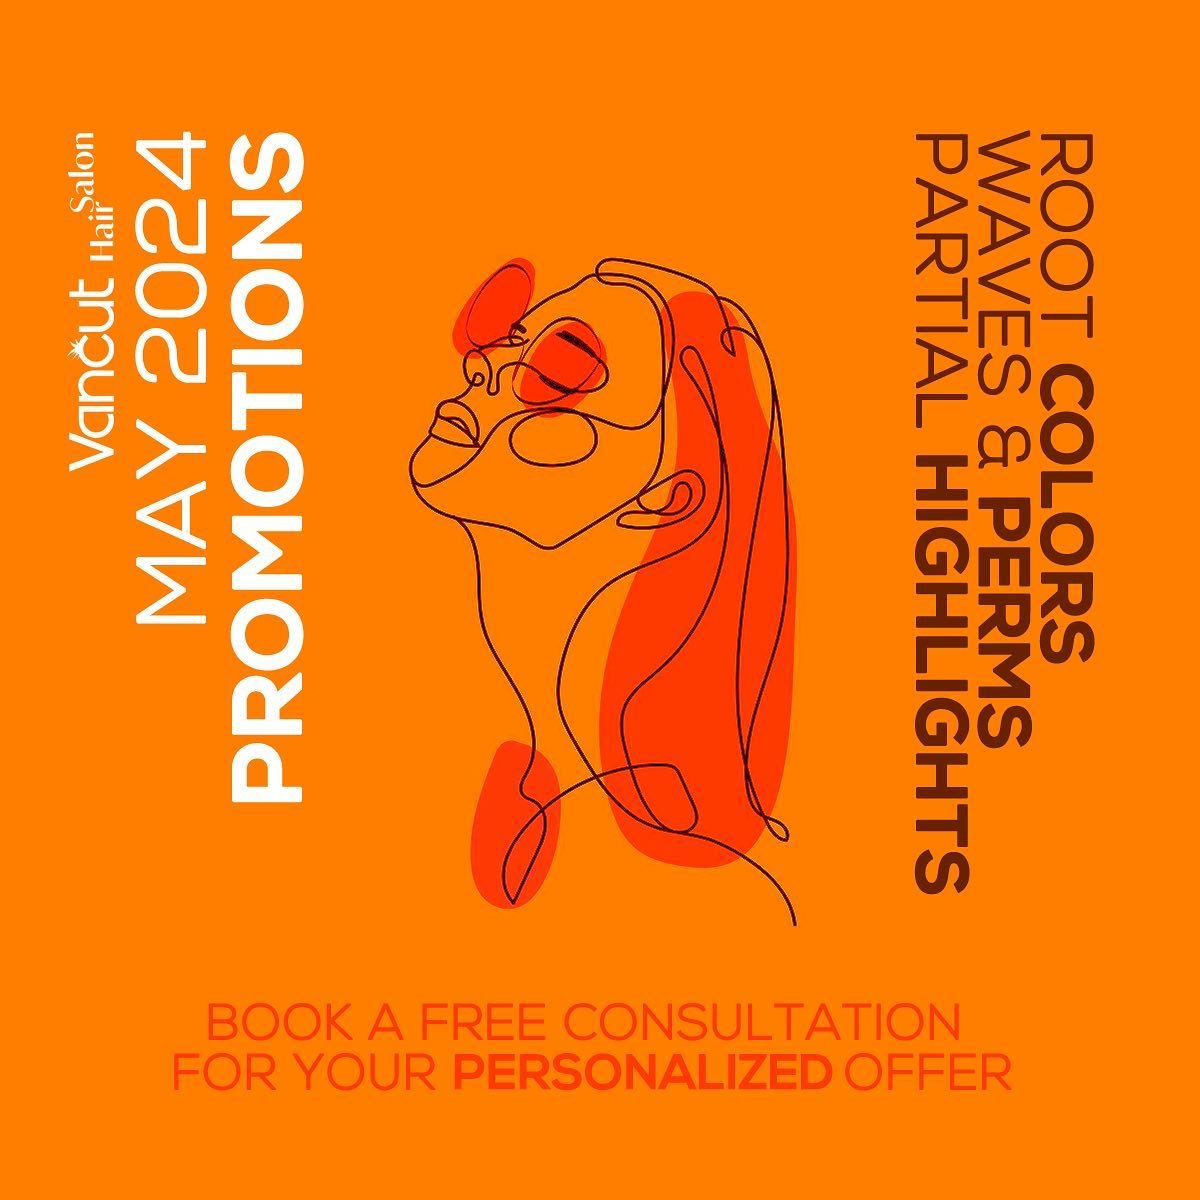 We&rsquo;re excited to announce that our May 2024 offers are here and personalized for you! Now booking online, hassle-free. Have some fun with your hair this month! 😊🤗🥰

#coquitlam #vancouver #portmoody #coquitlamhair #coquitlamhairstylist #vanco